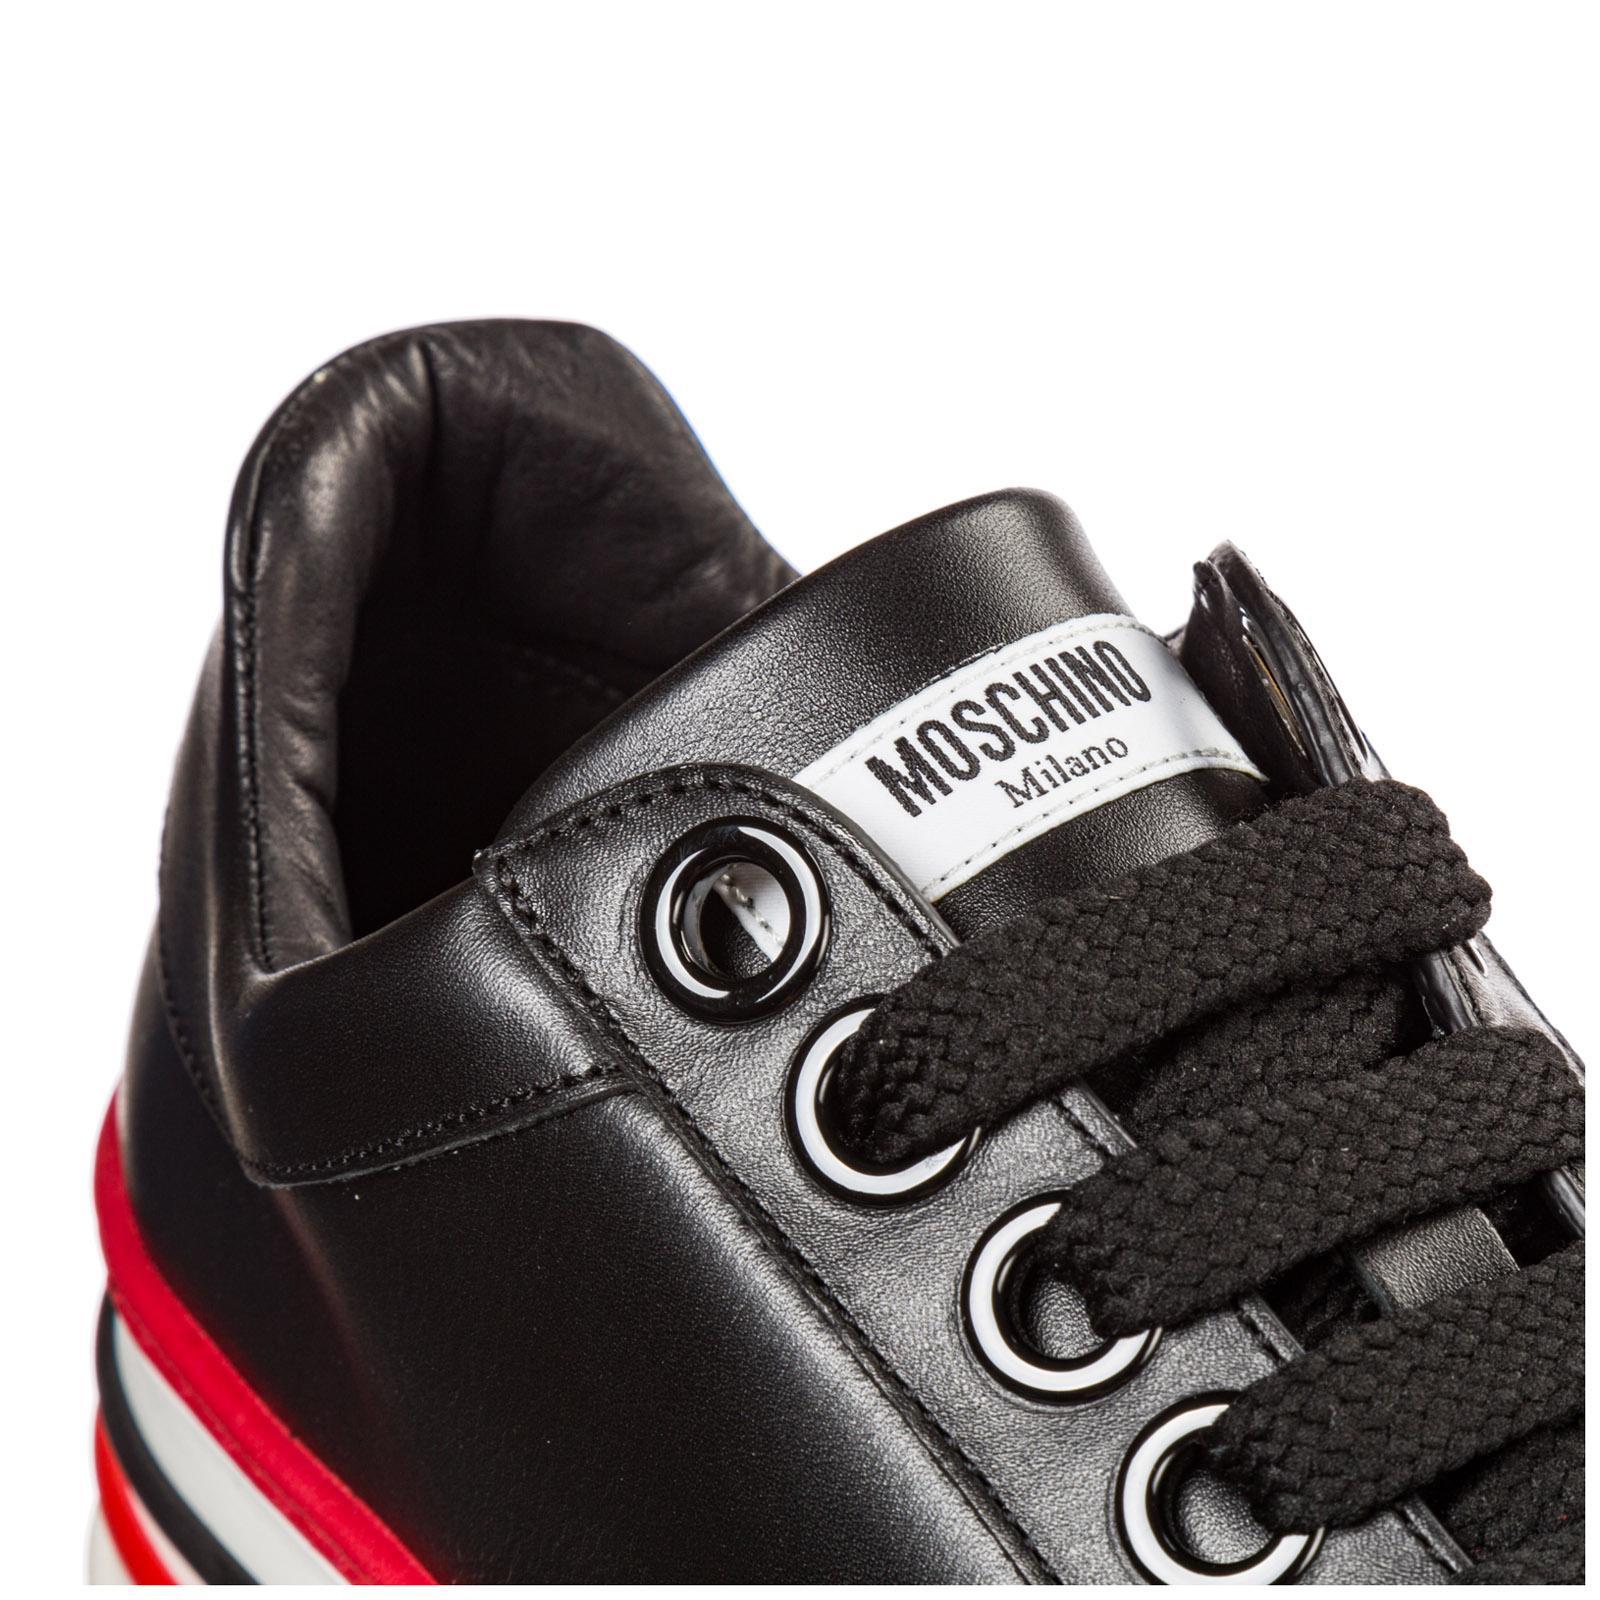 Moschino Women's Shoes Leather Trainers Sneakers in Nero